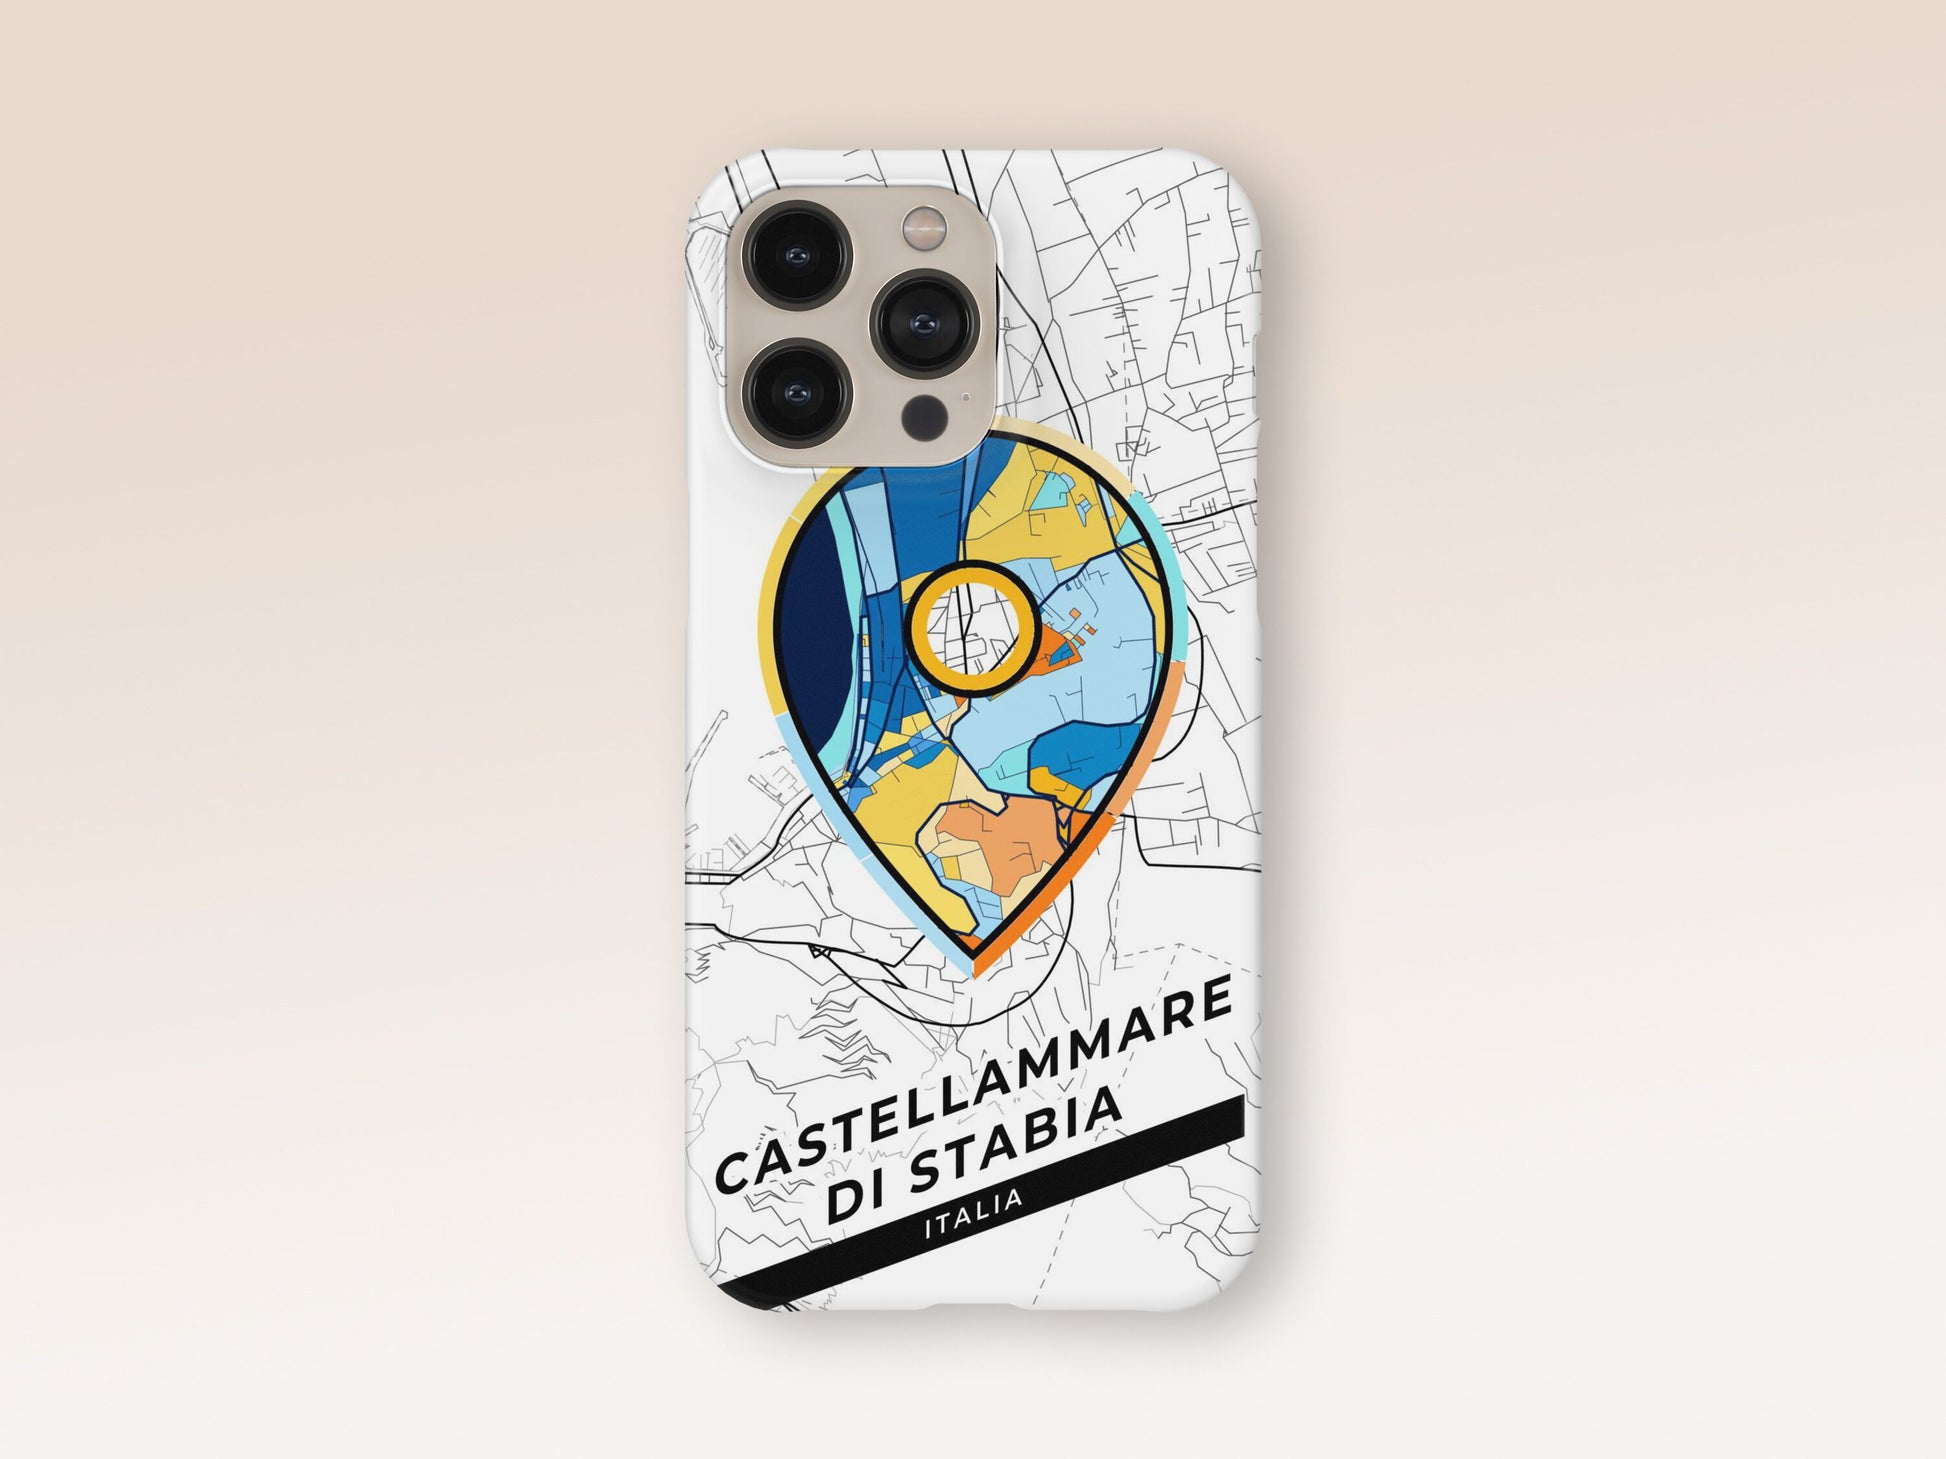 Castellammare Di Stabia Italy slim phone case with colorful icon. Birthday, wedding or housewarming gift. Couple match cases. 1